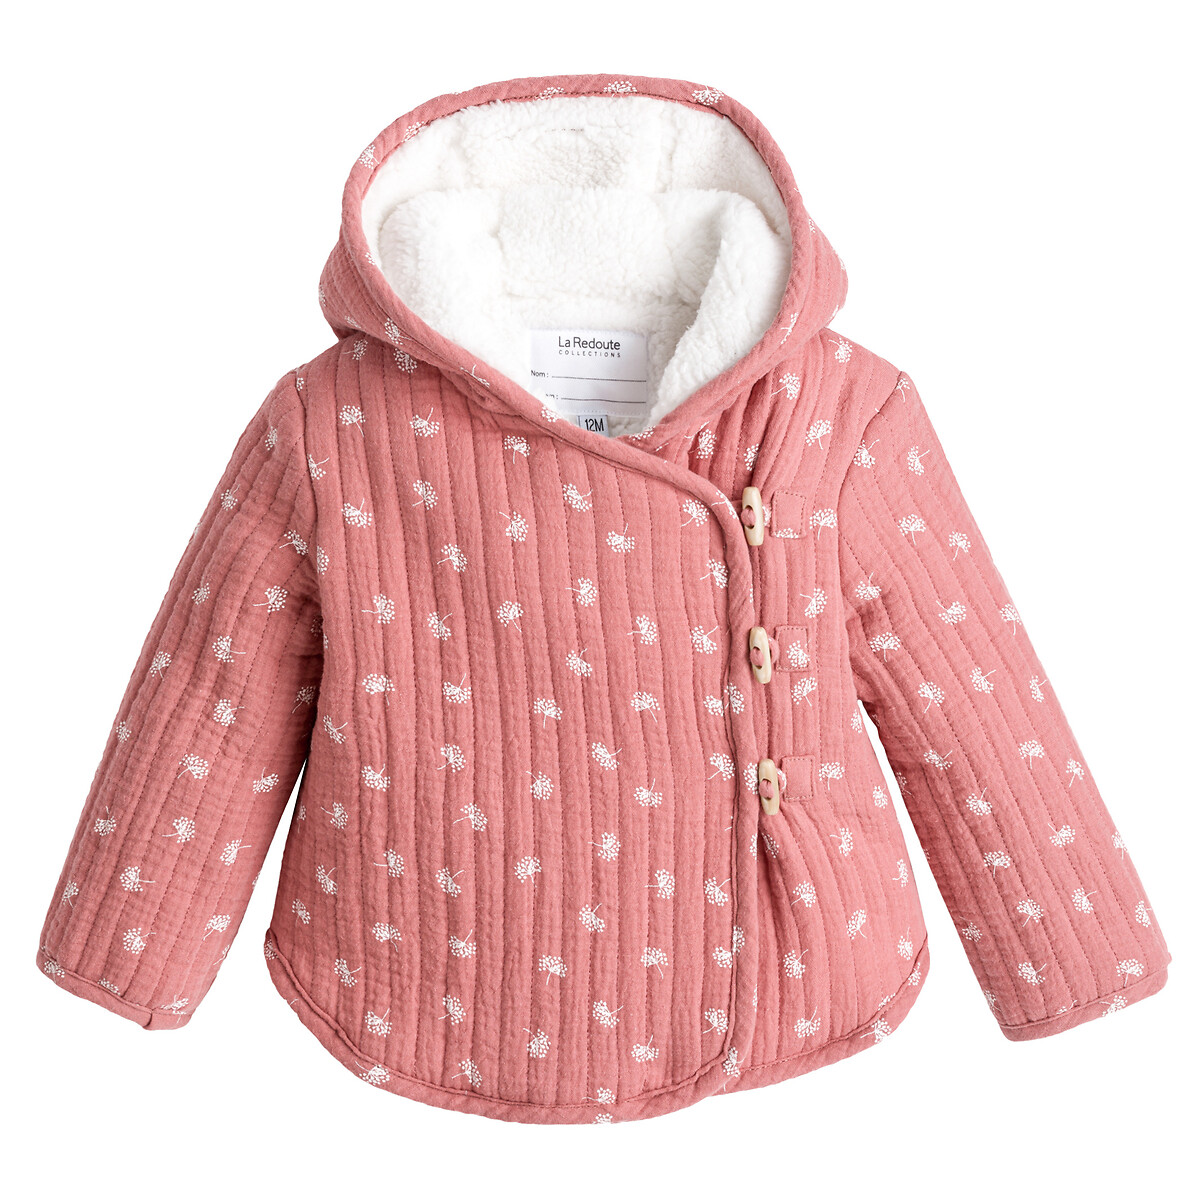 ref 629 LA REDOUTE BABY GIRLS BUTTONED COAT PINK AGE 9 MONTHS NEW 